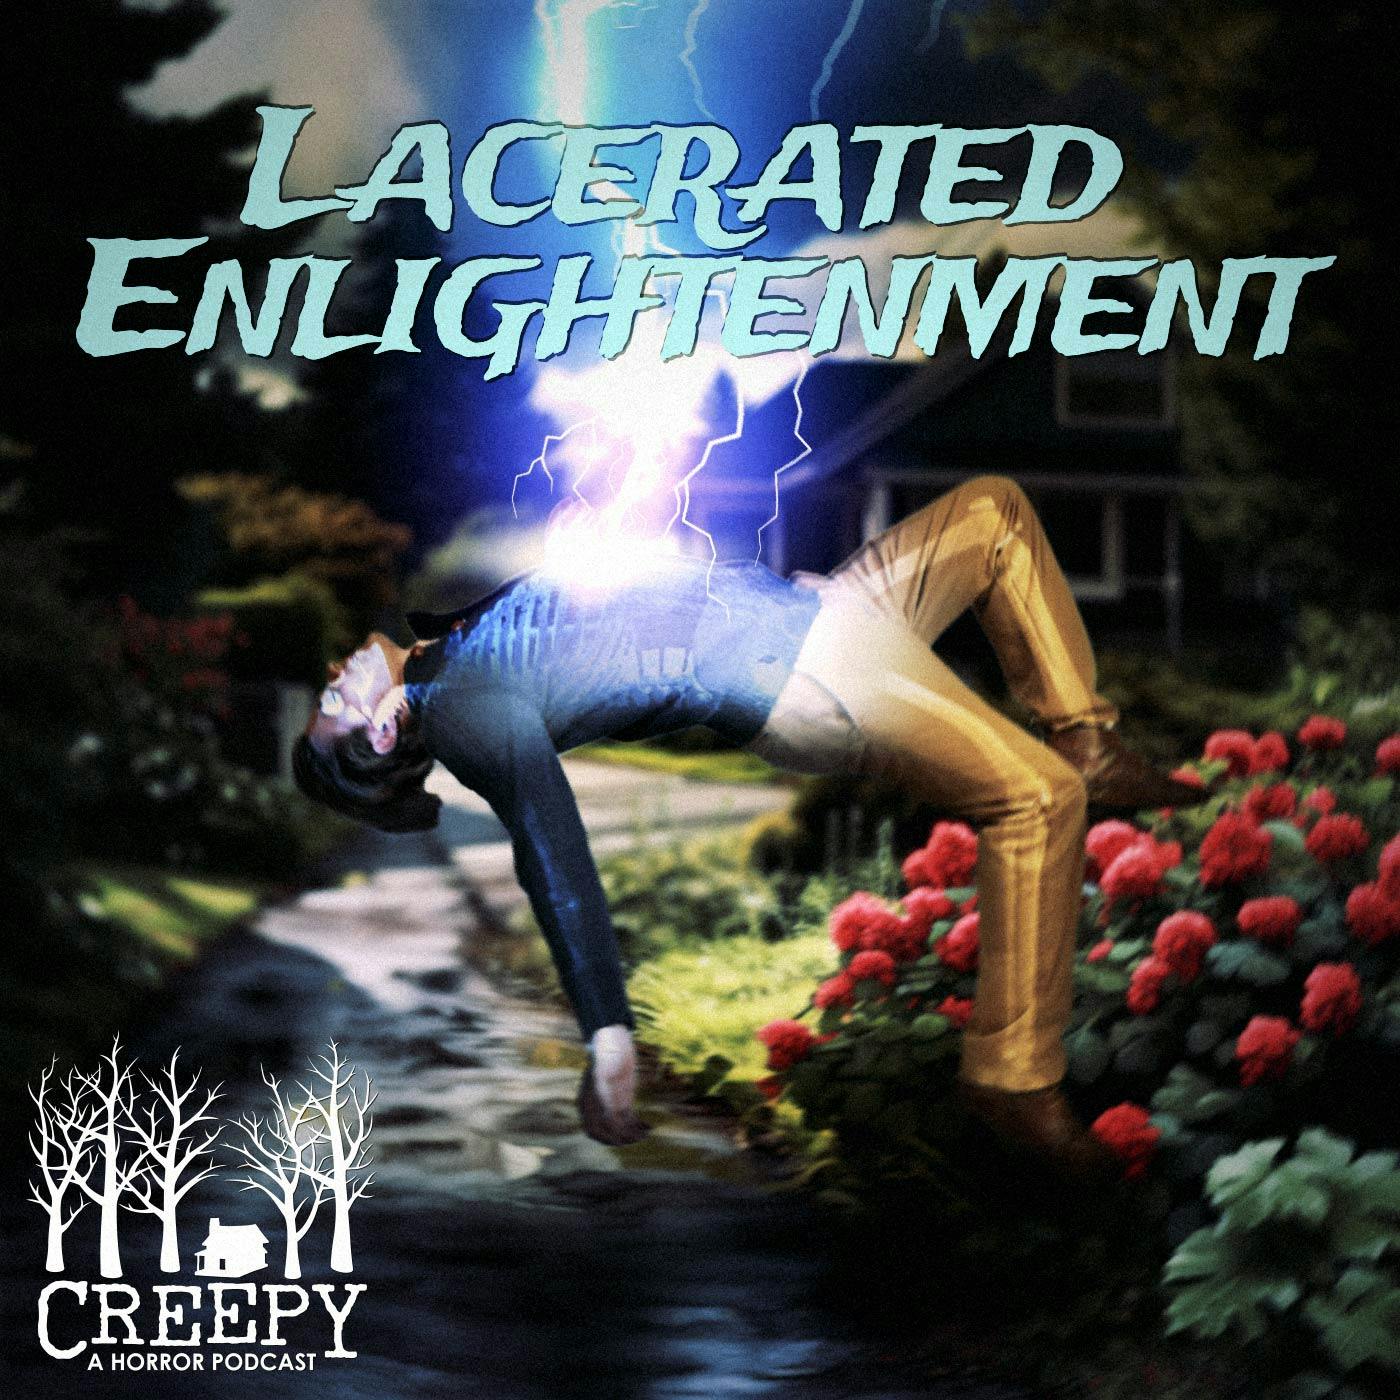 Lacerated Enlightenment